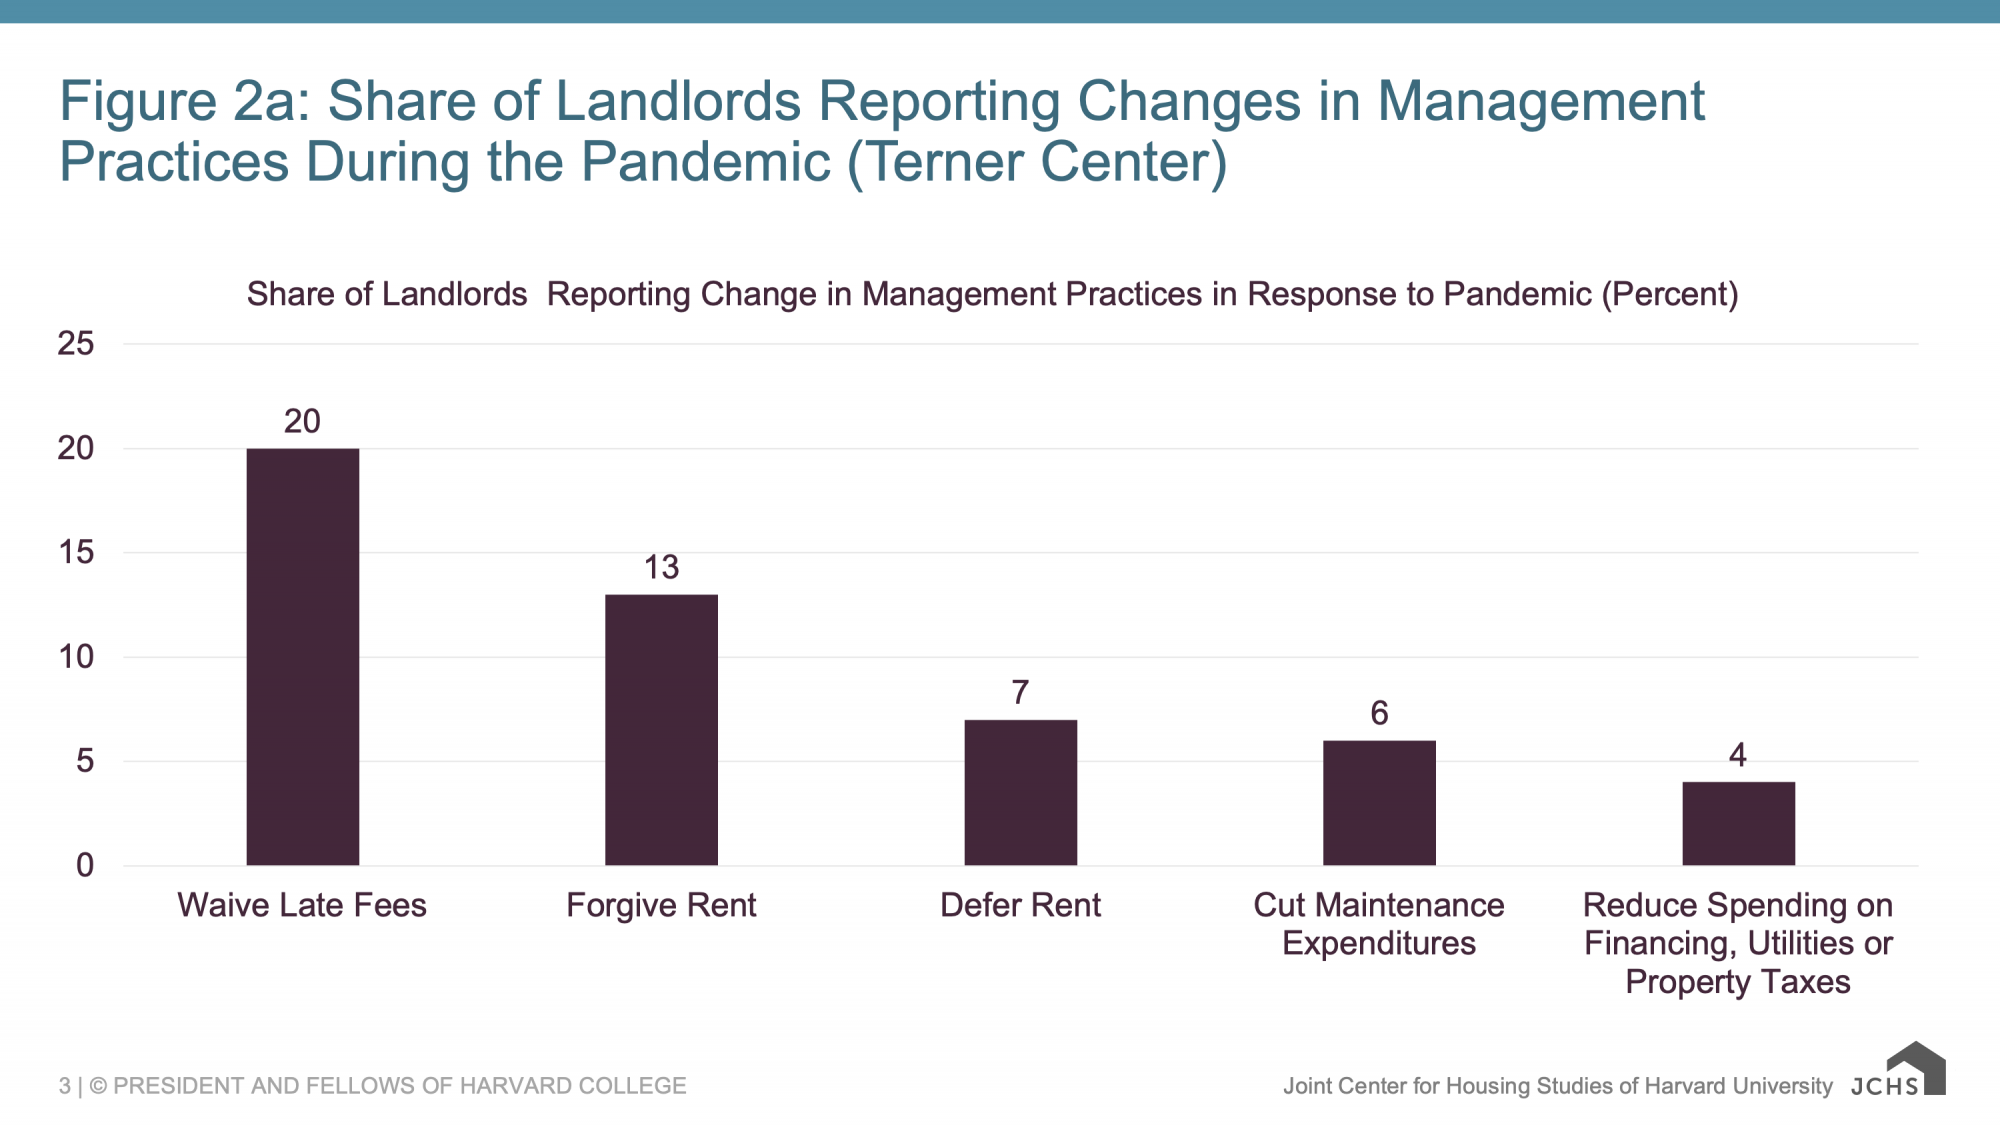 Share of Landlords Reporting Change in Management Practices in Response to Pandemic (Percent)